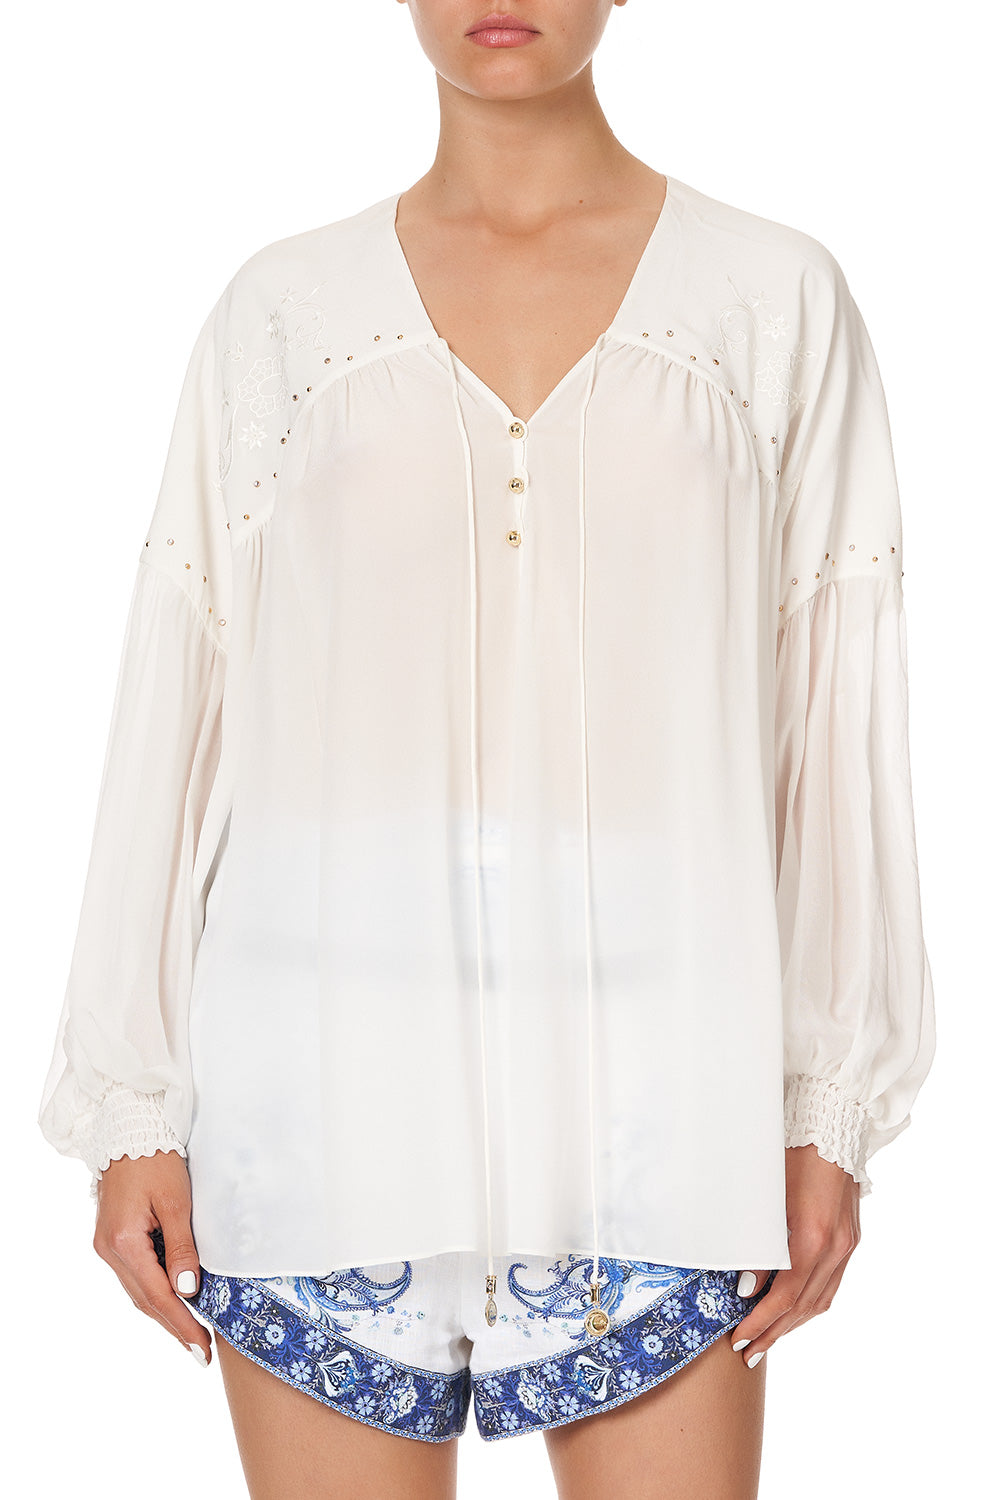 BLOUSON BLOUSE WITH NECK TIE SOLID WHITE